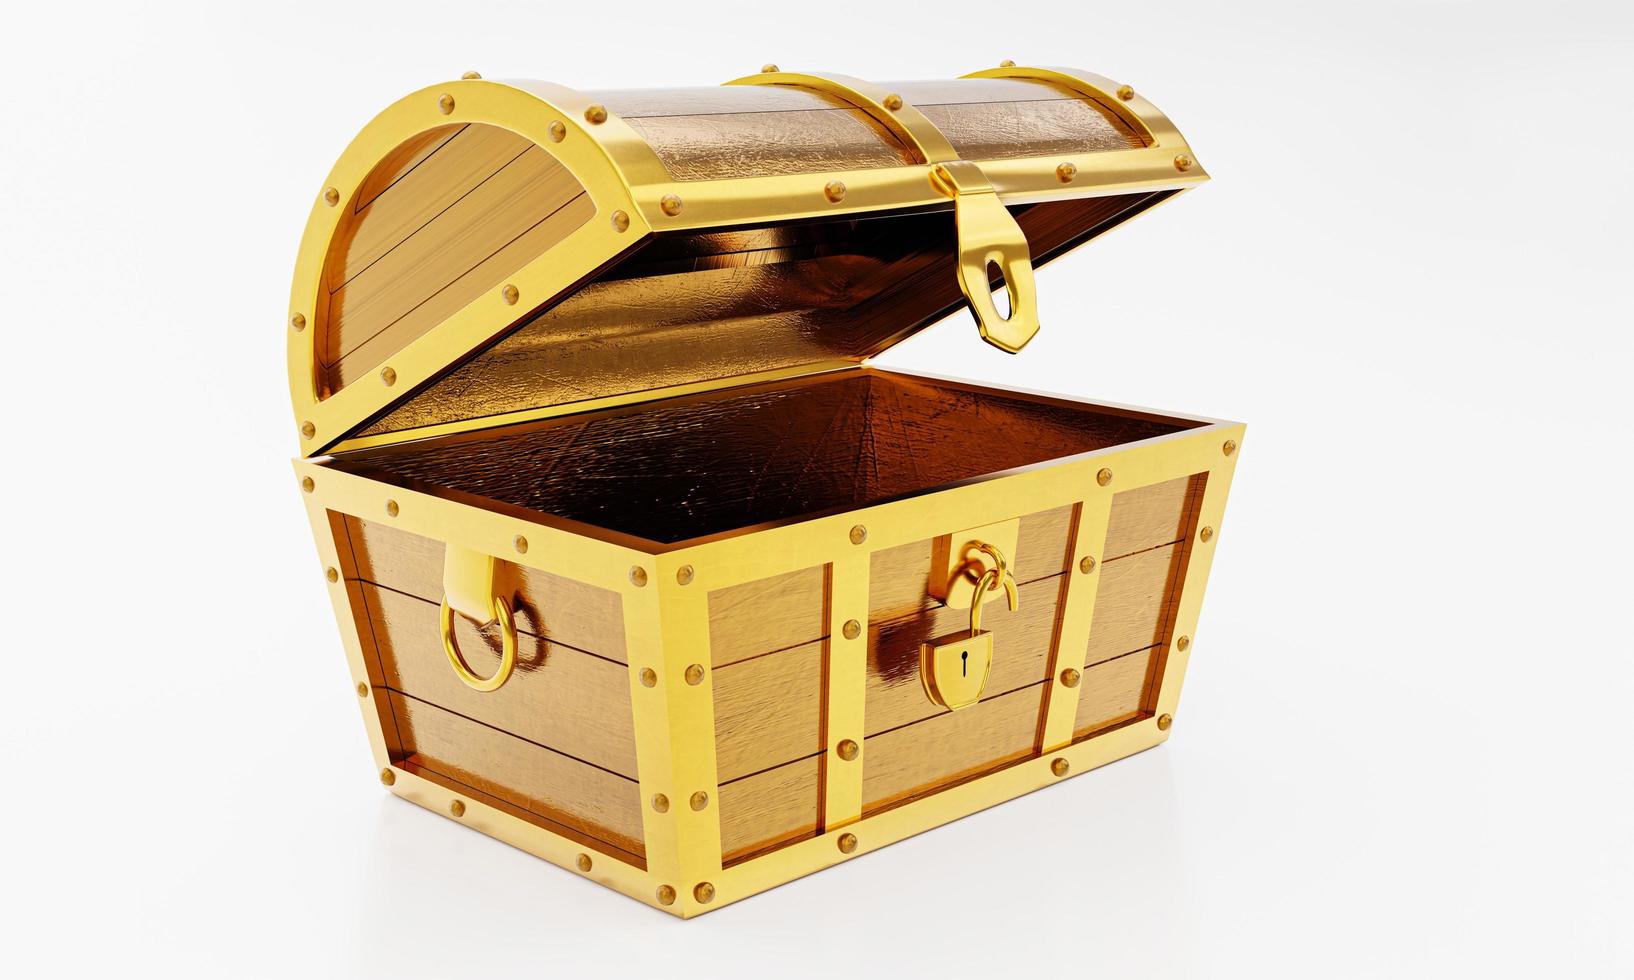 Treasure chest made of gold. Antique chest made of wood and metal, painted gold. Antique padlock locks the treasure chest. on a white background. 3D rendering photo